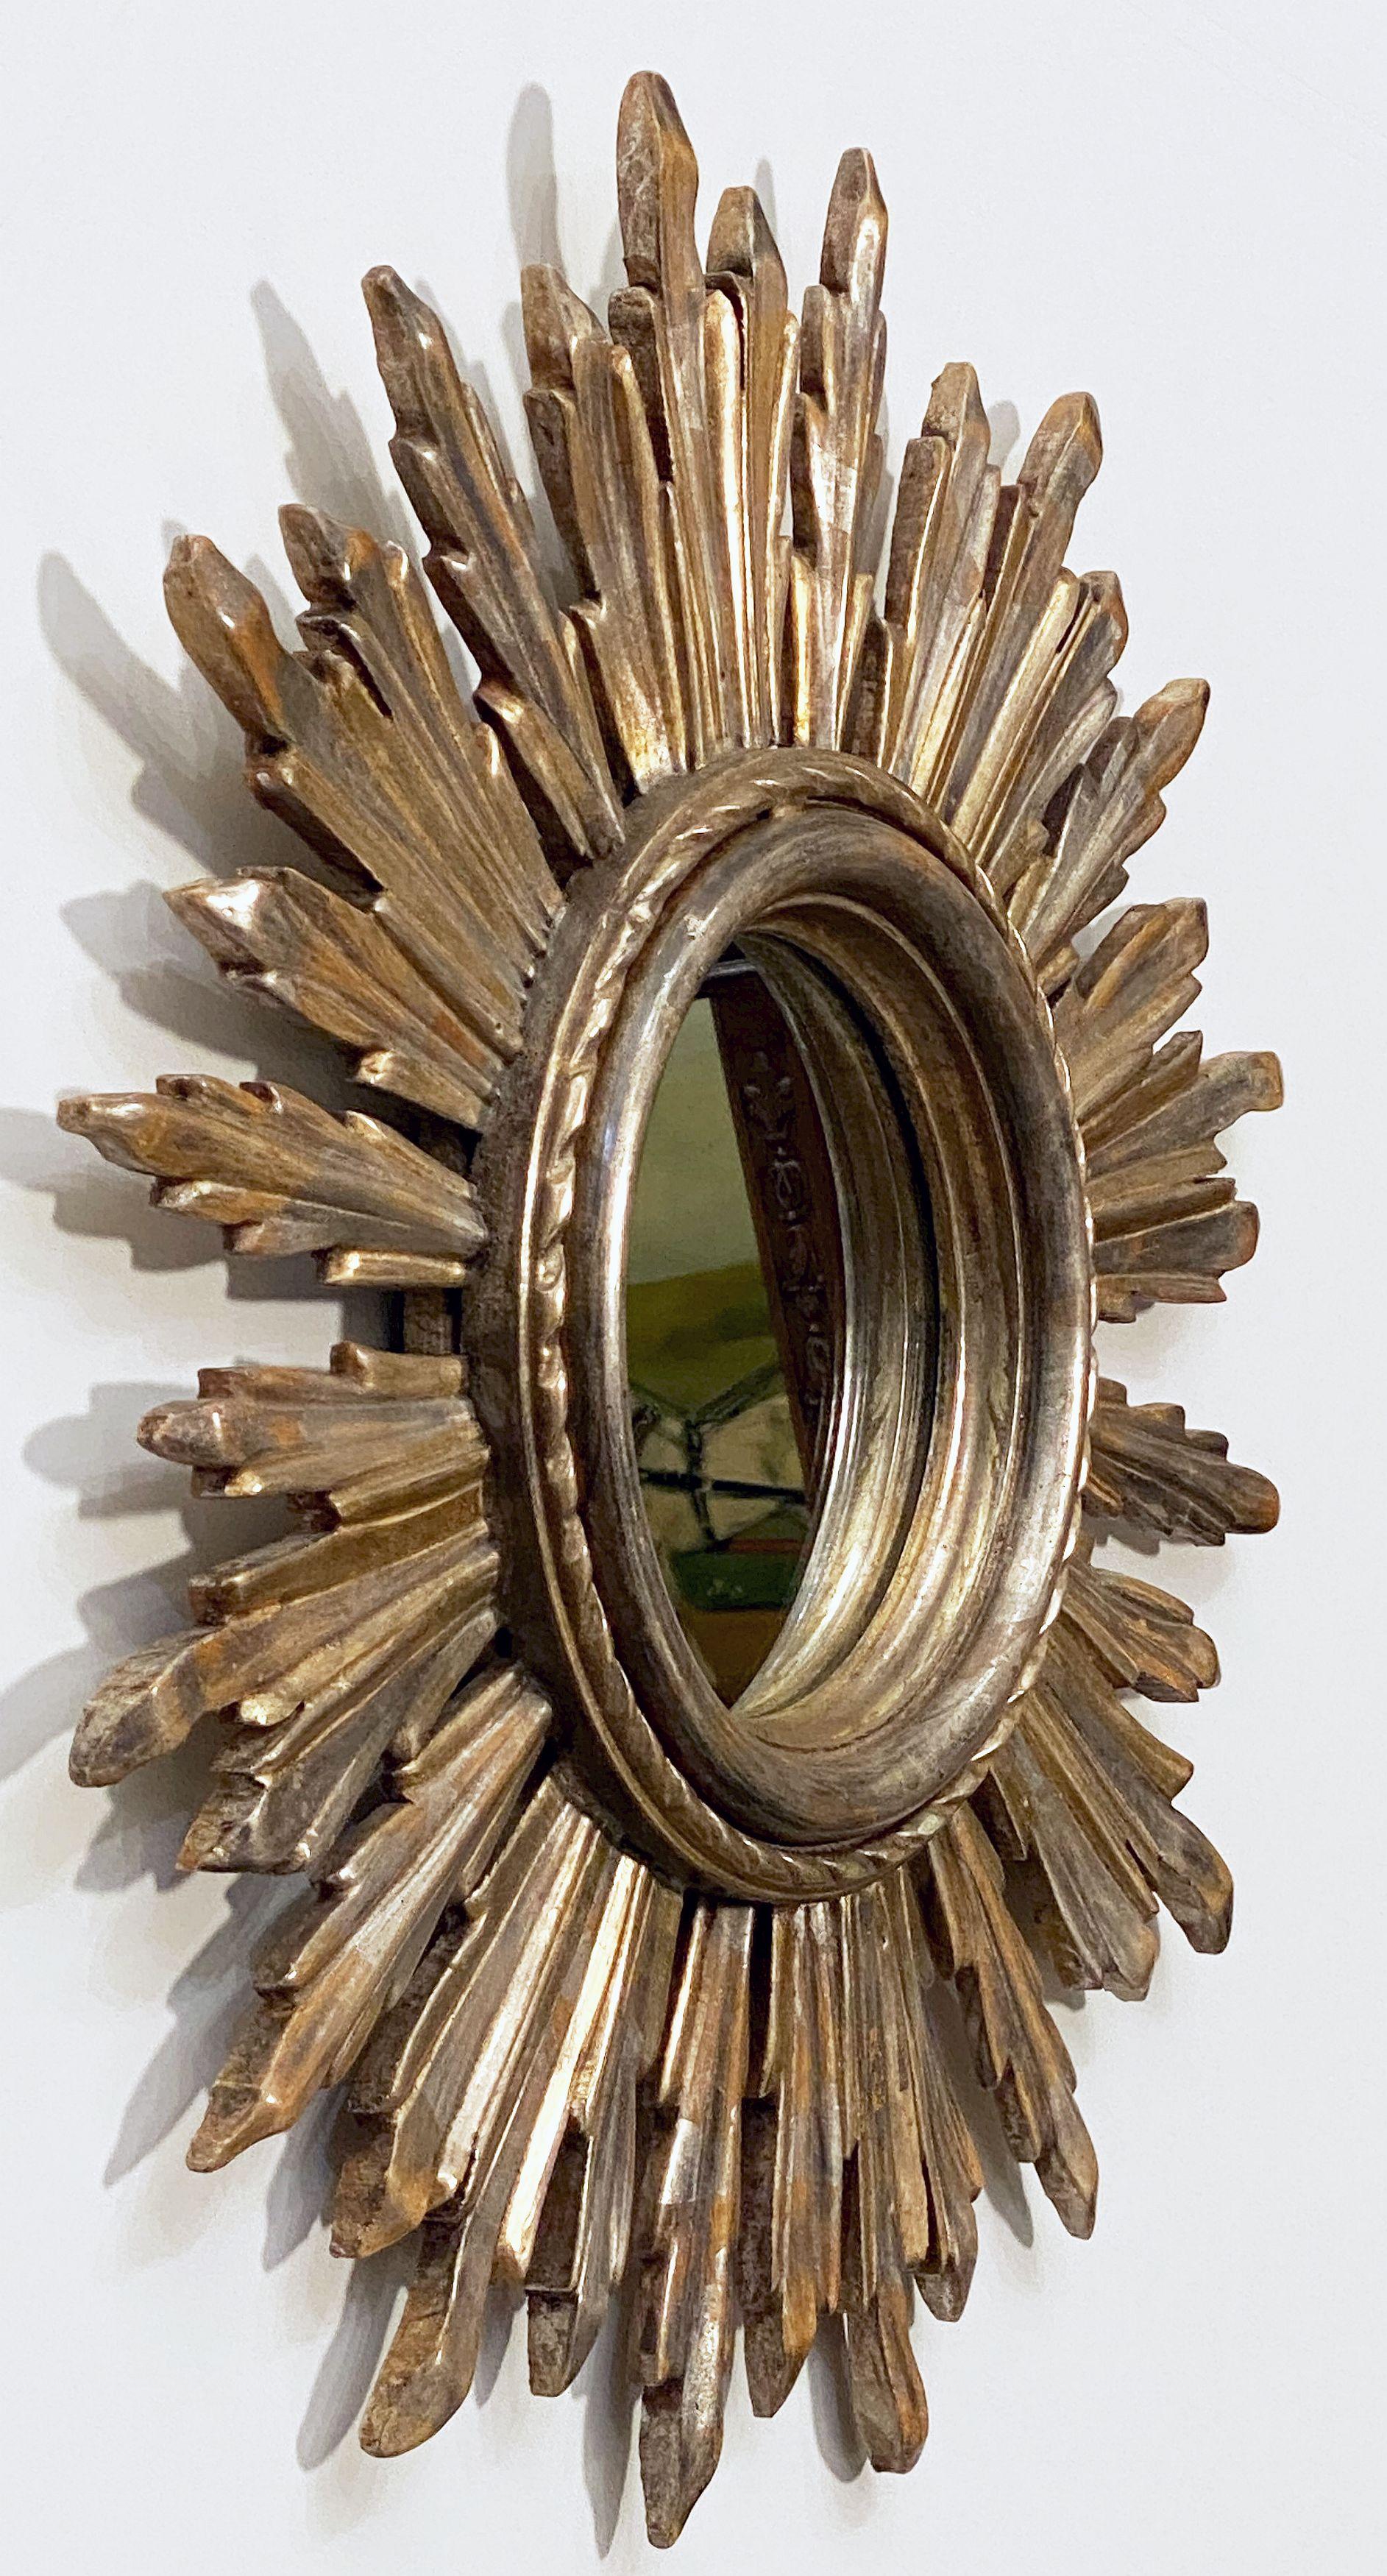 A lovely French gilt sunburst (or starburst) mirror featuring silver leaf and faded golden rays with round mirrored glass center in moulded frame.

Outside diameter is 21 inches

Diameter of interior mirror is 7 inches

